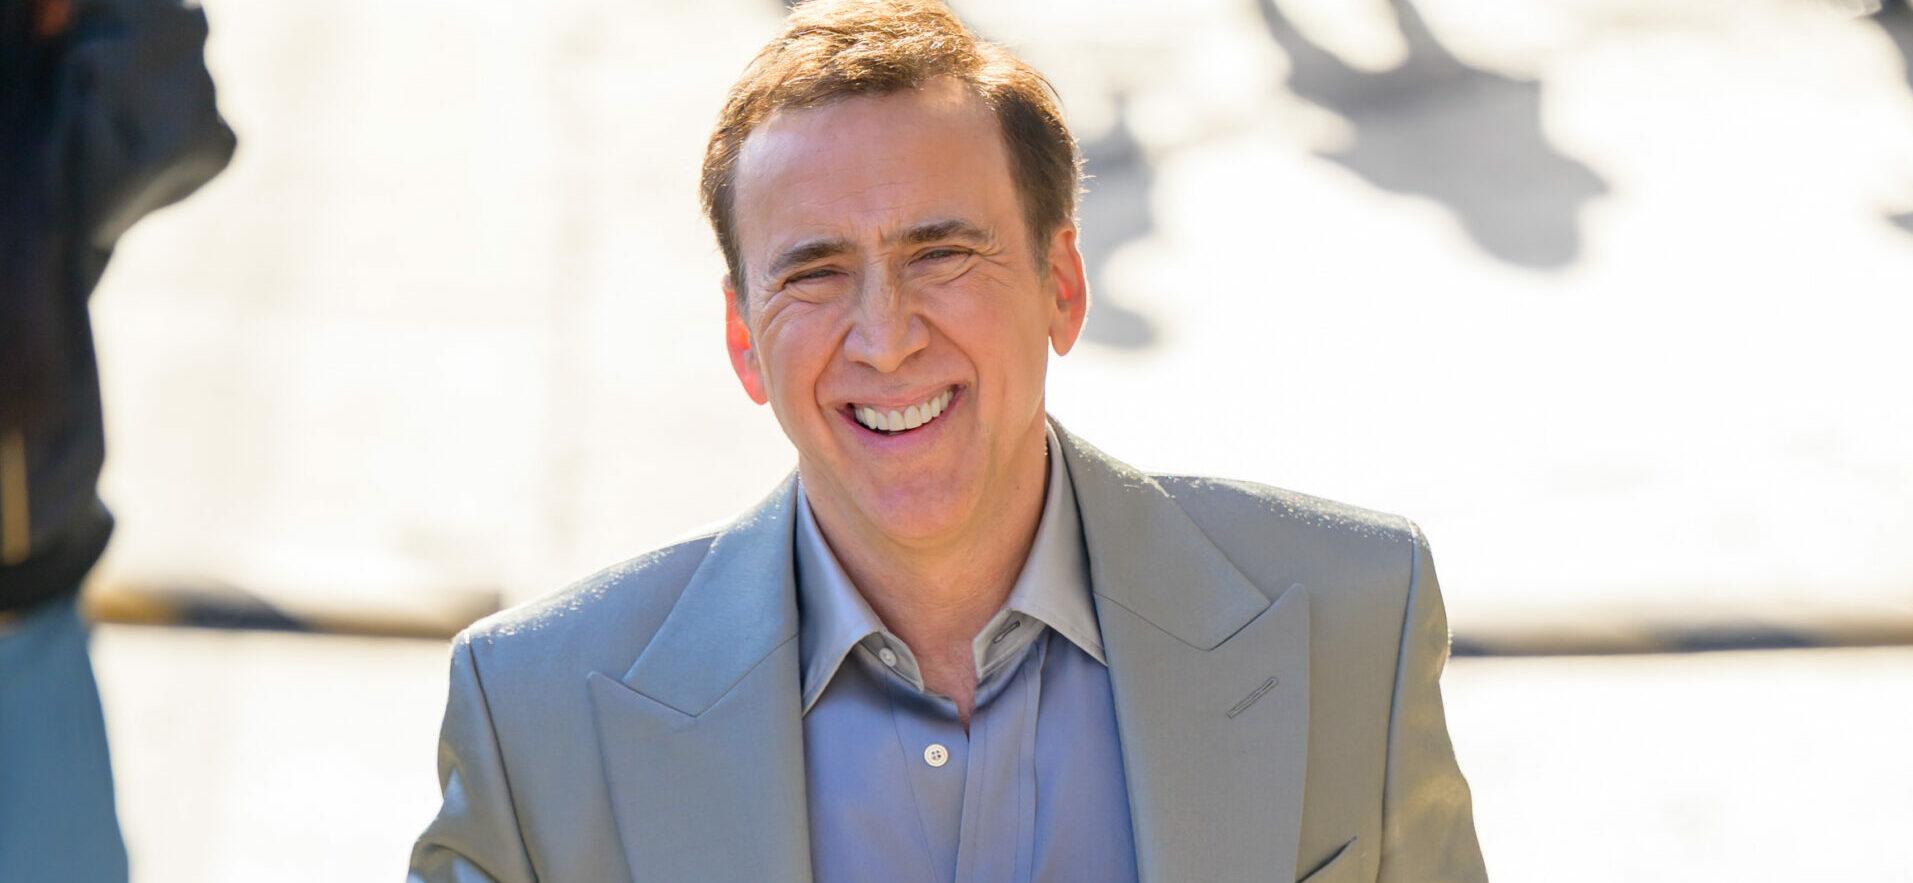 Nicolas Cage has red hair now